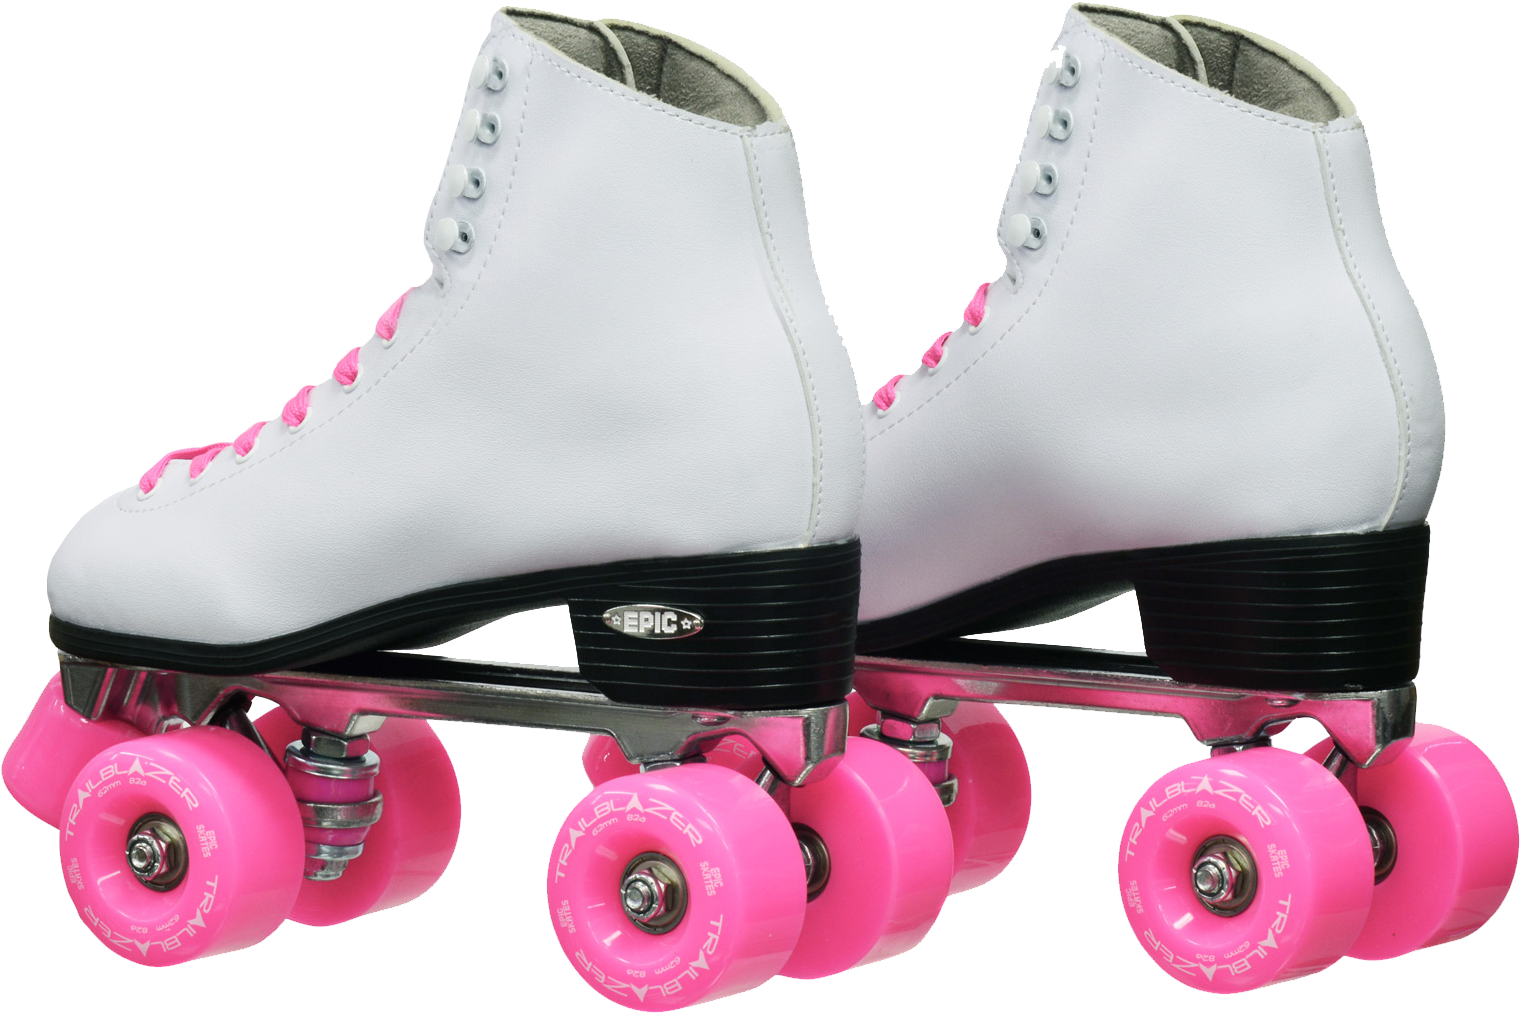 A Pair Of White Roller Skates With Pink Wheels